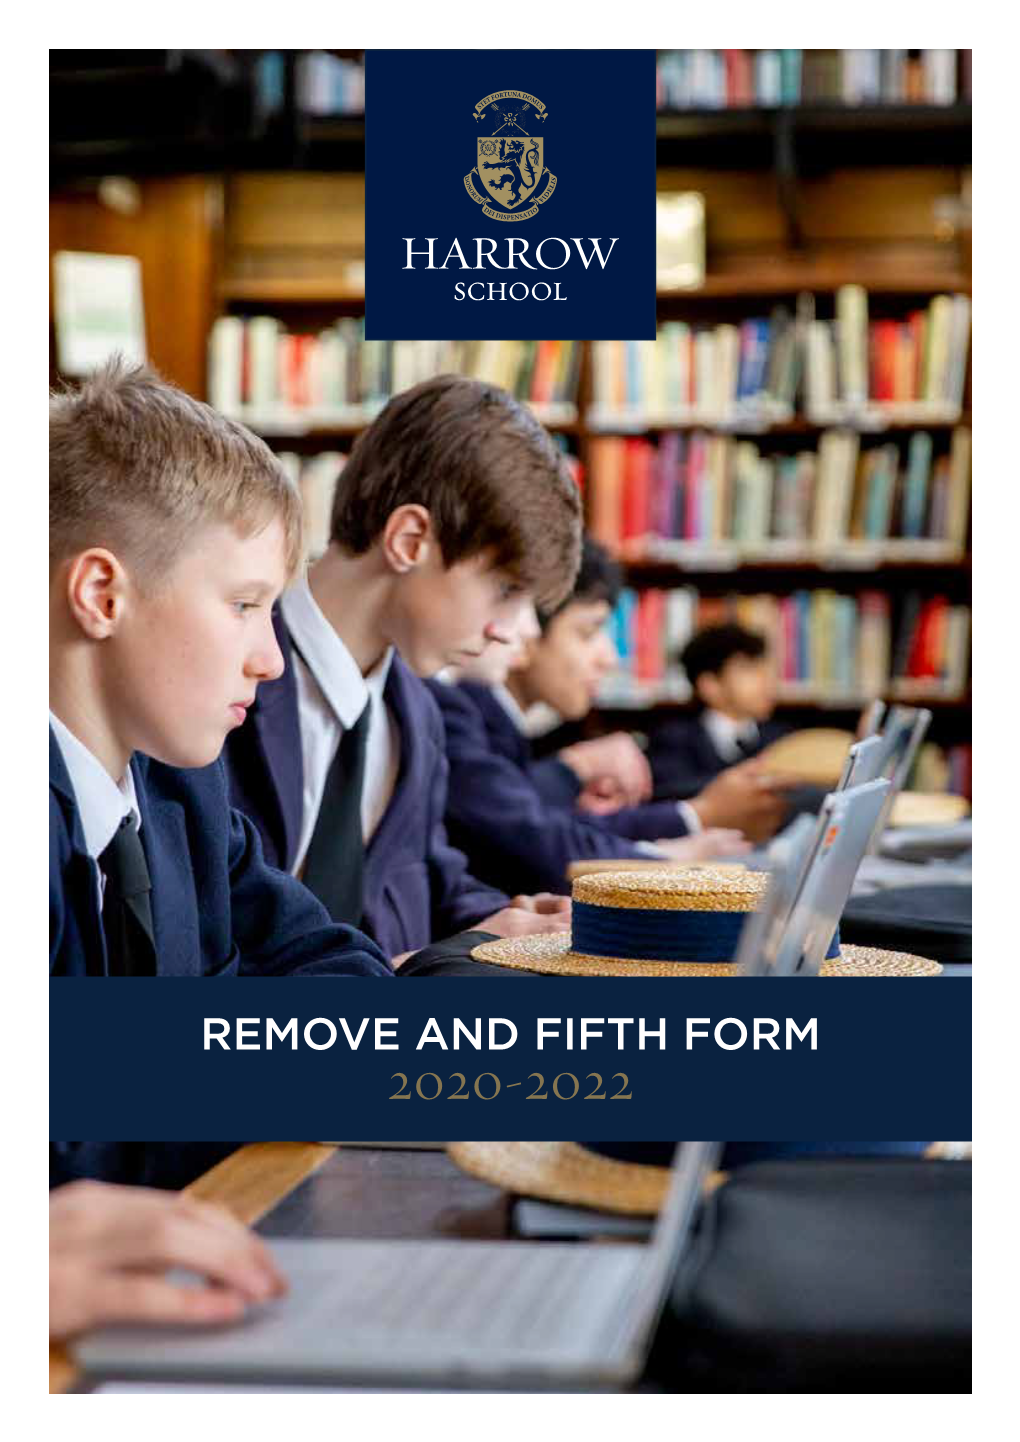 Remove and Fifth Form 2020-2022 Harrow School Remove and Fifth Form 2020-2022